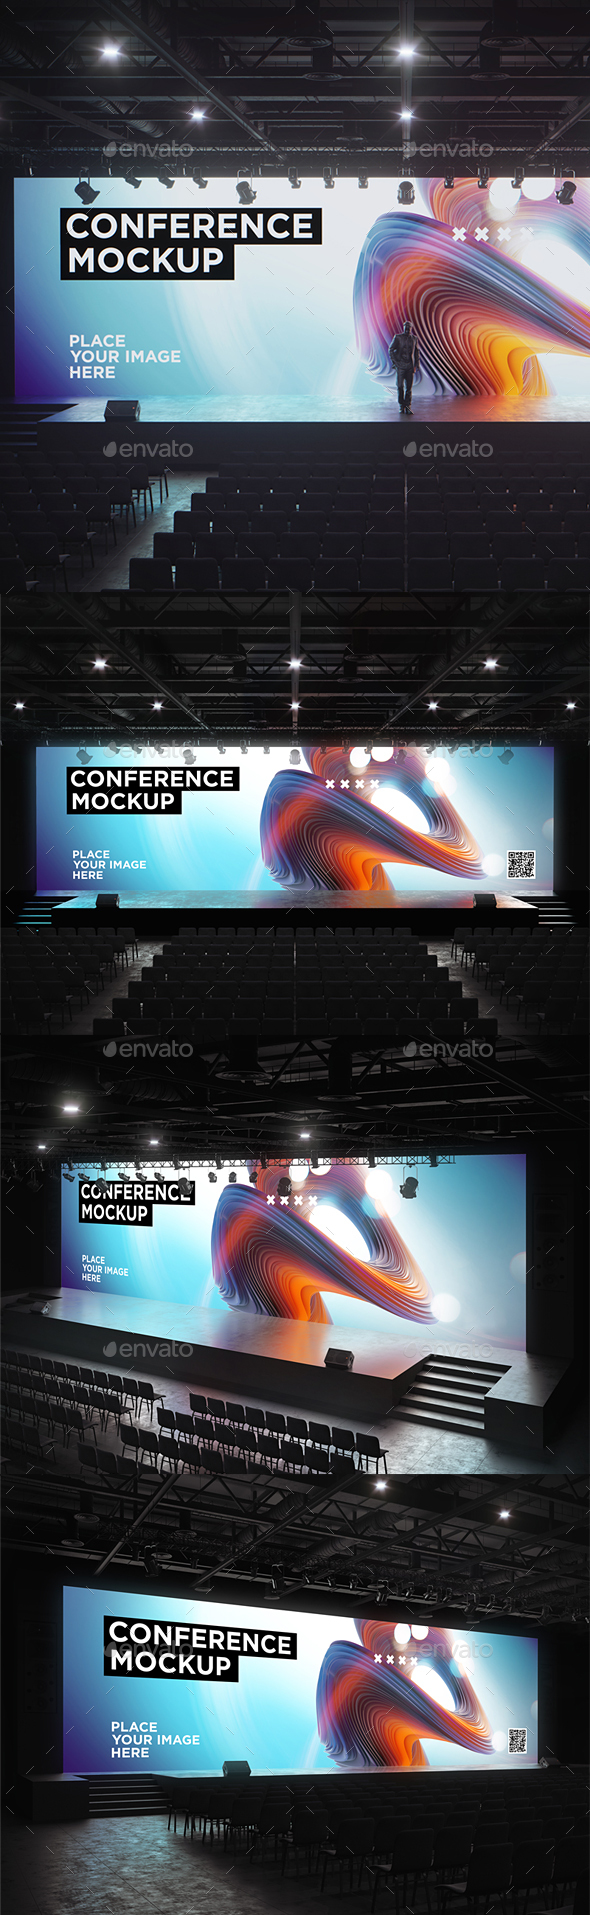 Download Conference Hall Screen Mockup By Tit0 Graphicriver